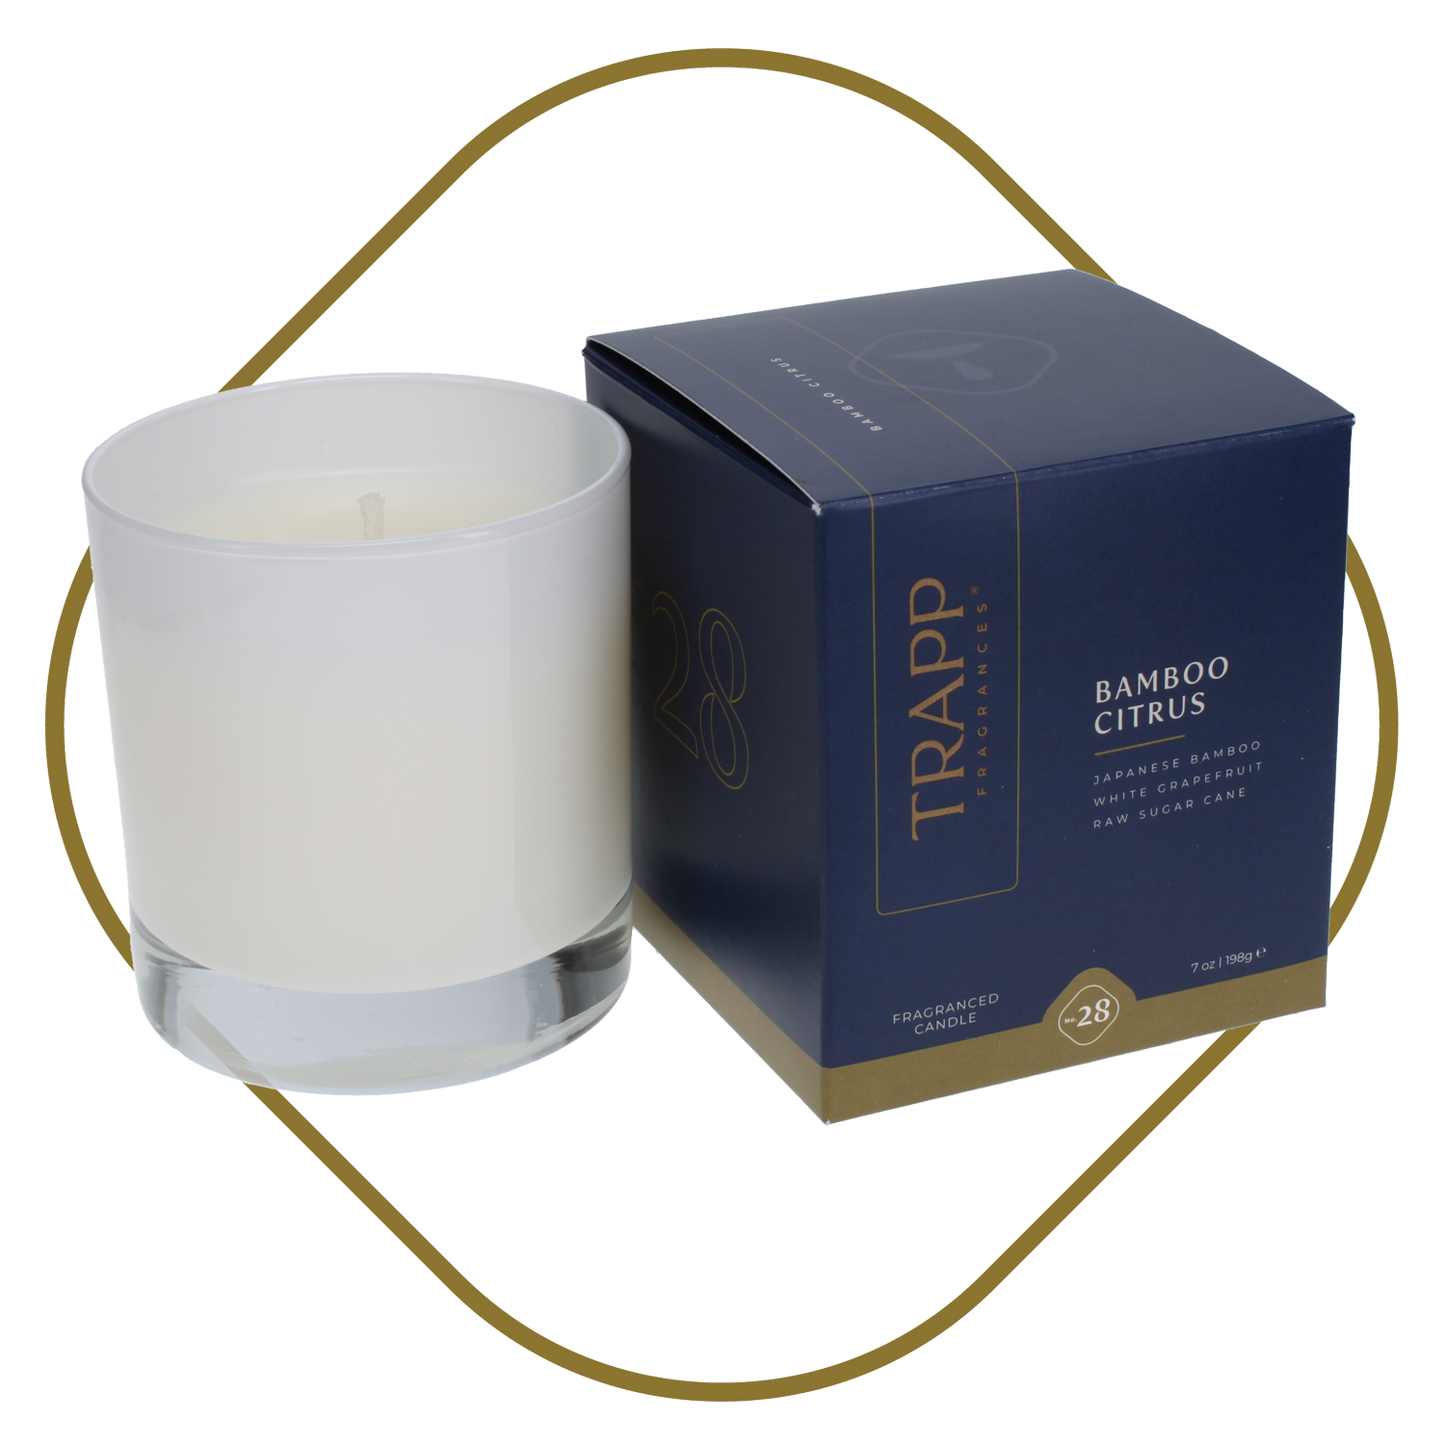 TRAPP CANDLE 7 OZ/ BAMBOO CITRUS